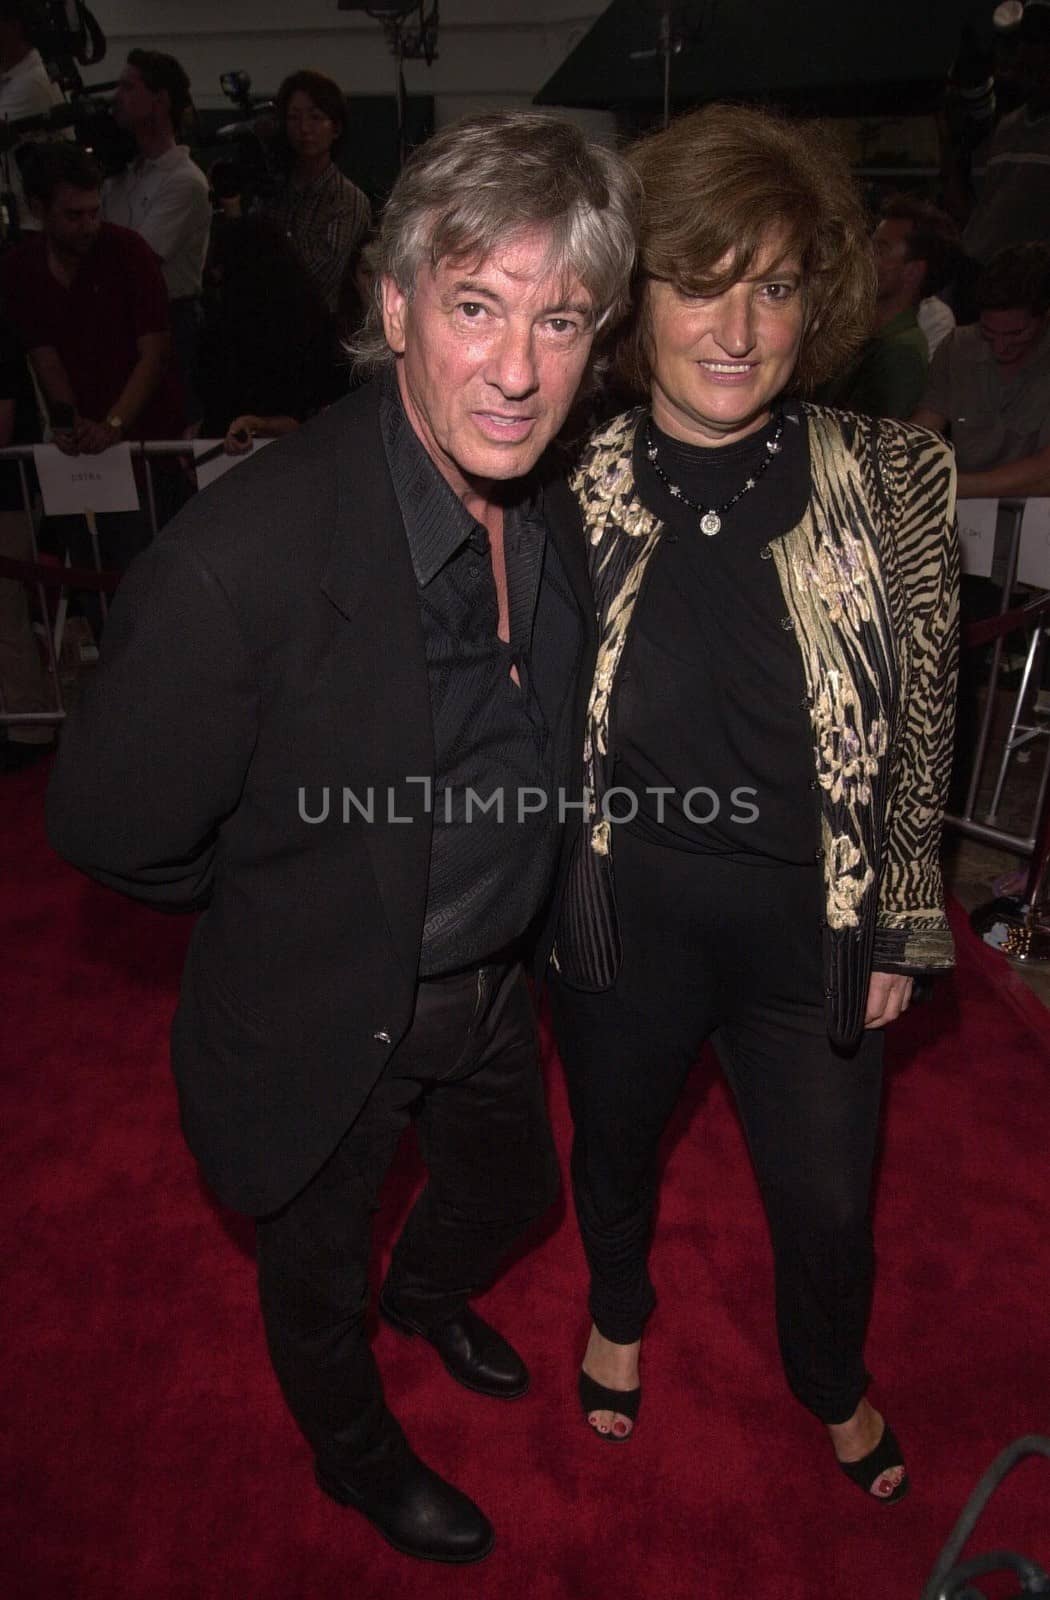 Paul Verhoeven and Wife Martina at the premiere of Hollow Man in Westwood. 08-02-00